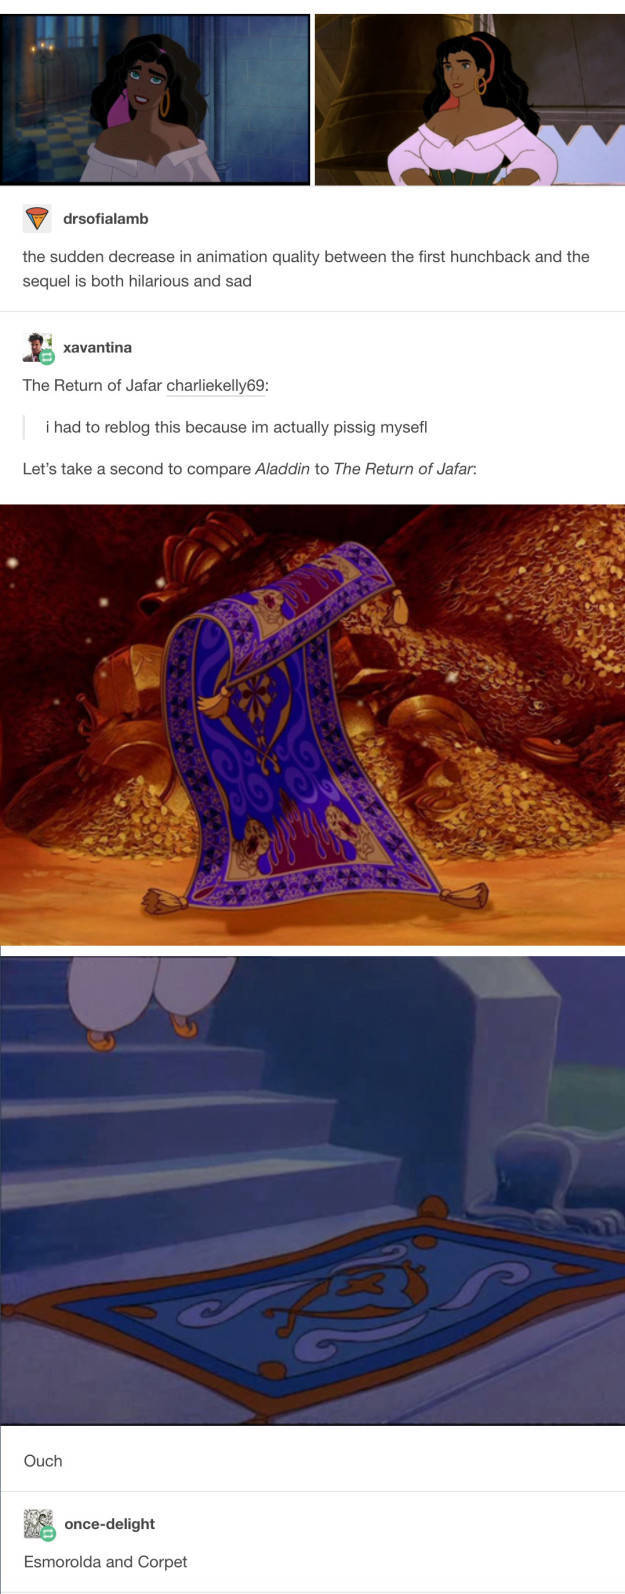 These Hilarious Disney Jokes Will Crack You Up